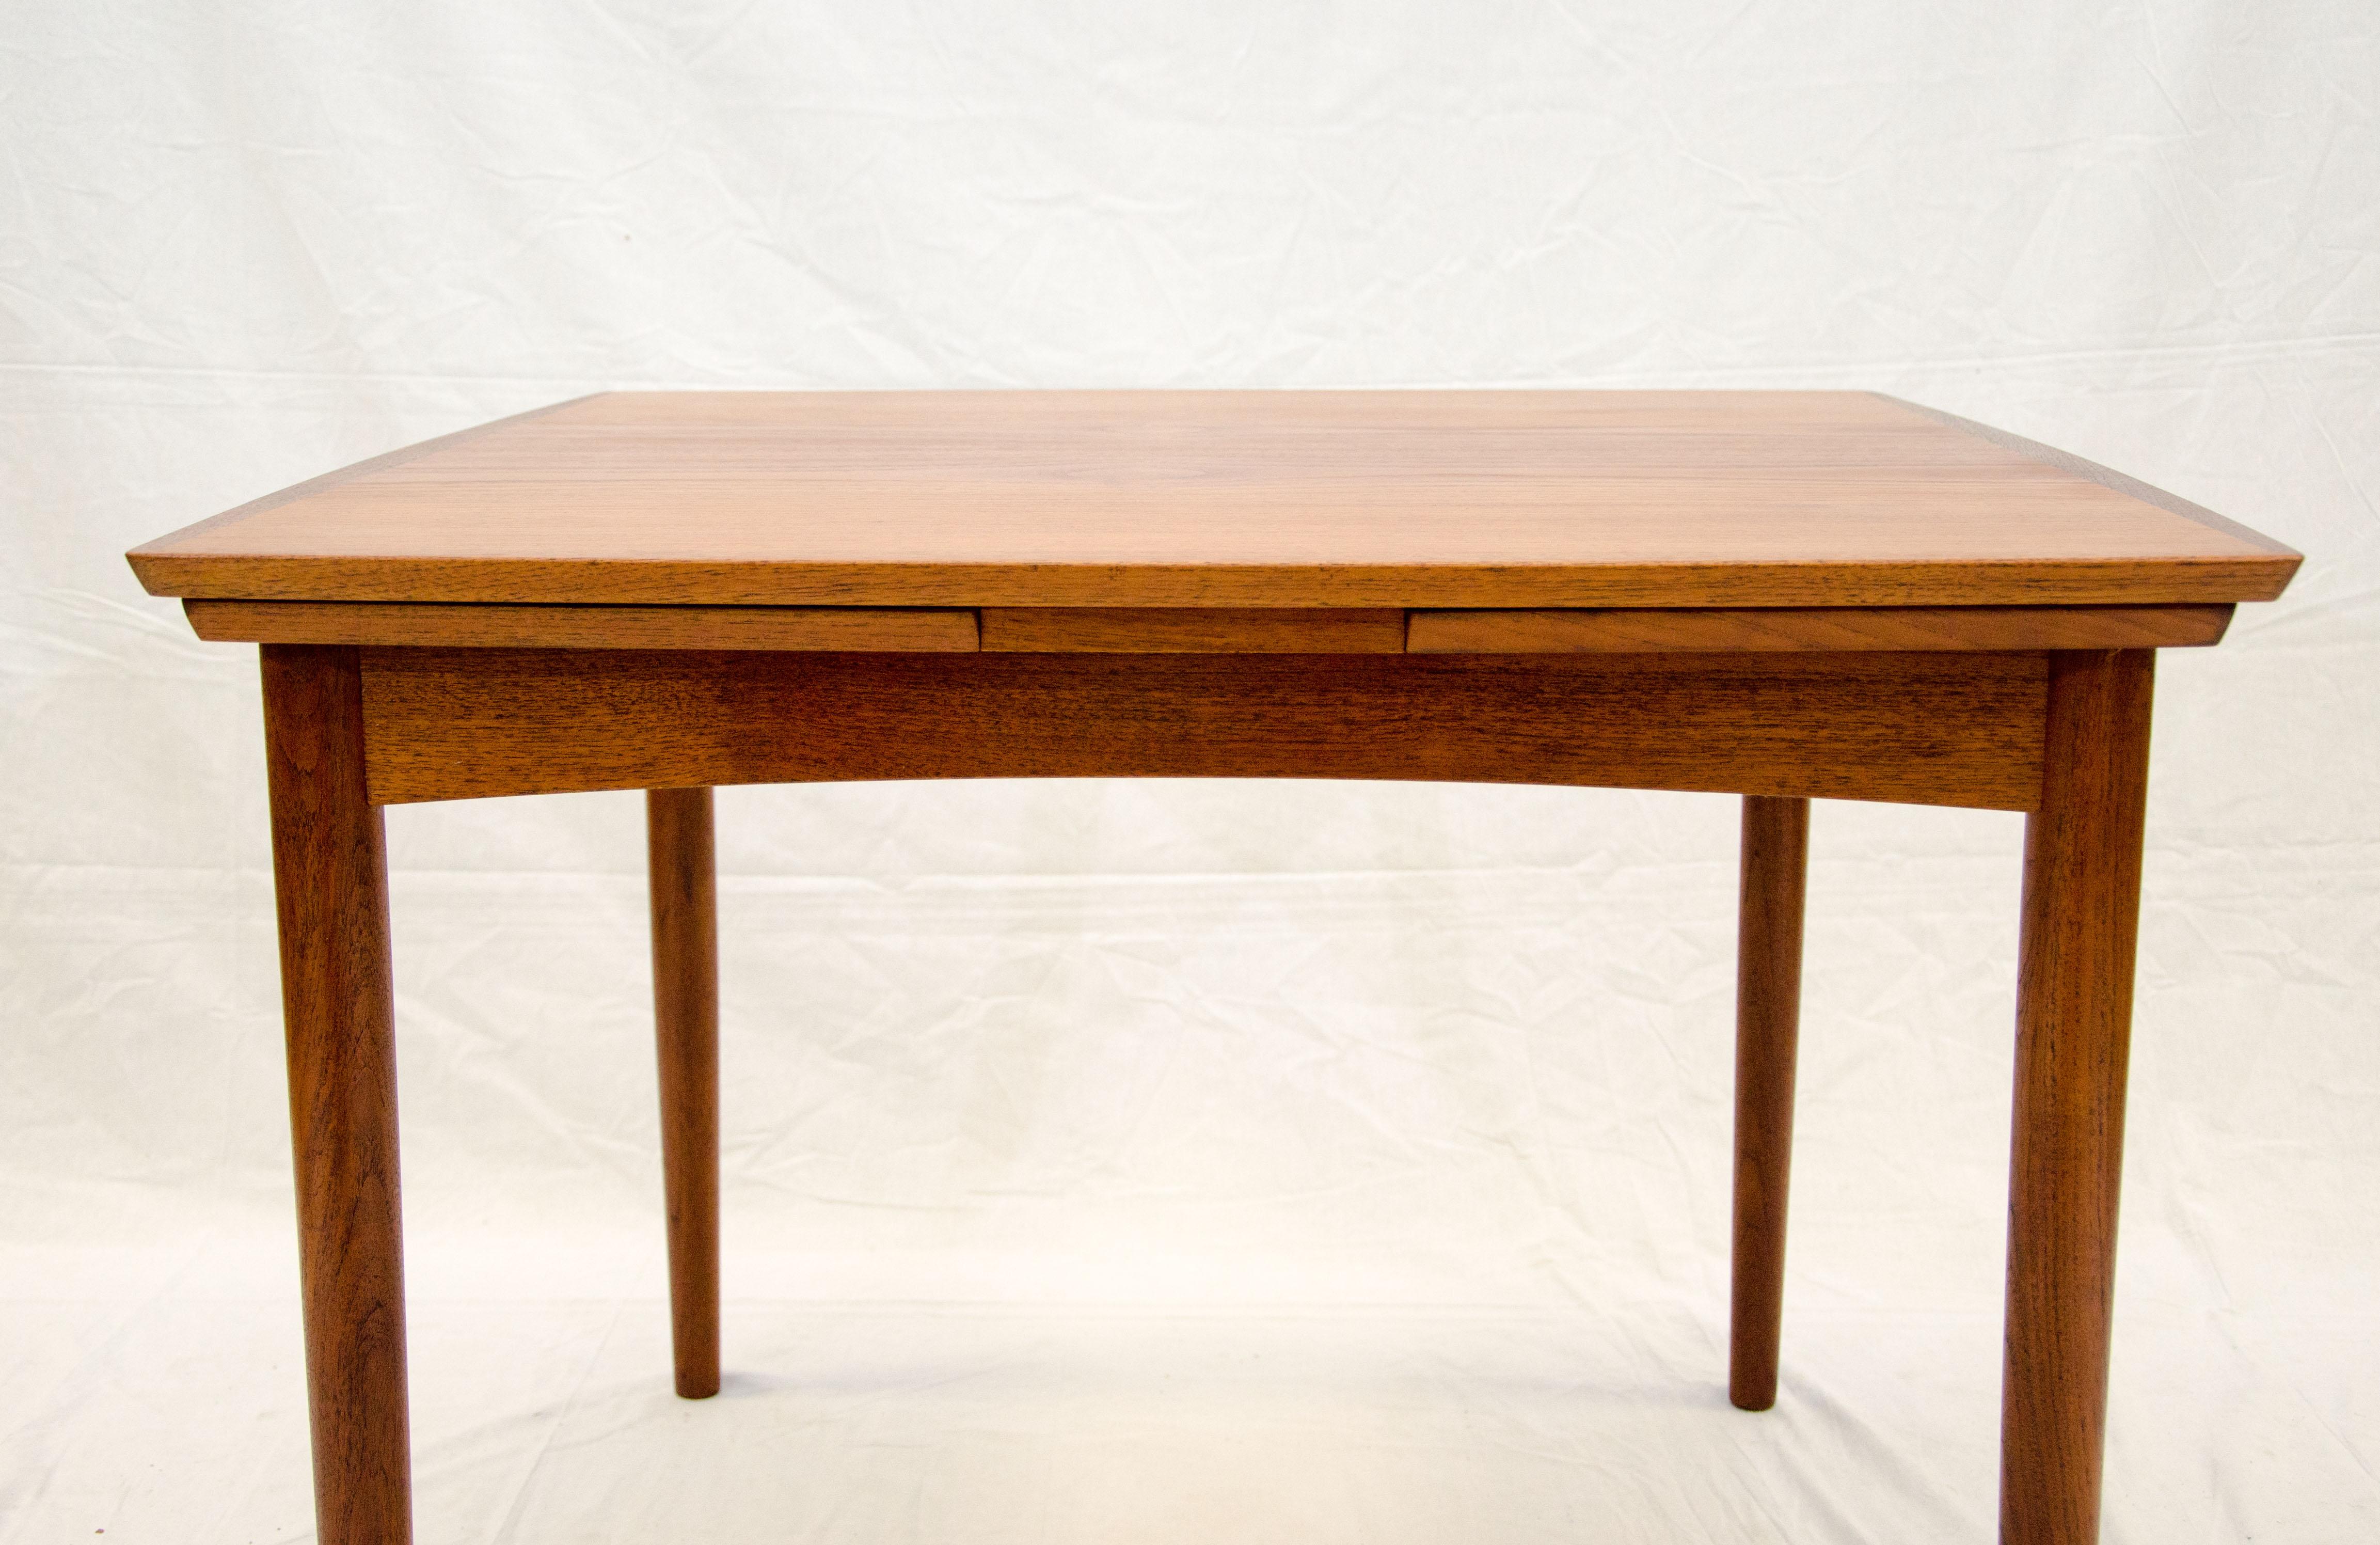 20th Century Small Square Danish Teak Draw-Leaf Dining or Breakfast Table